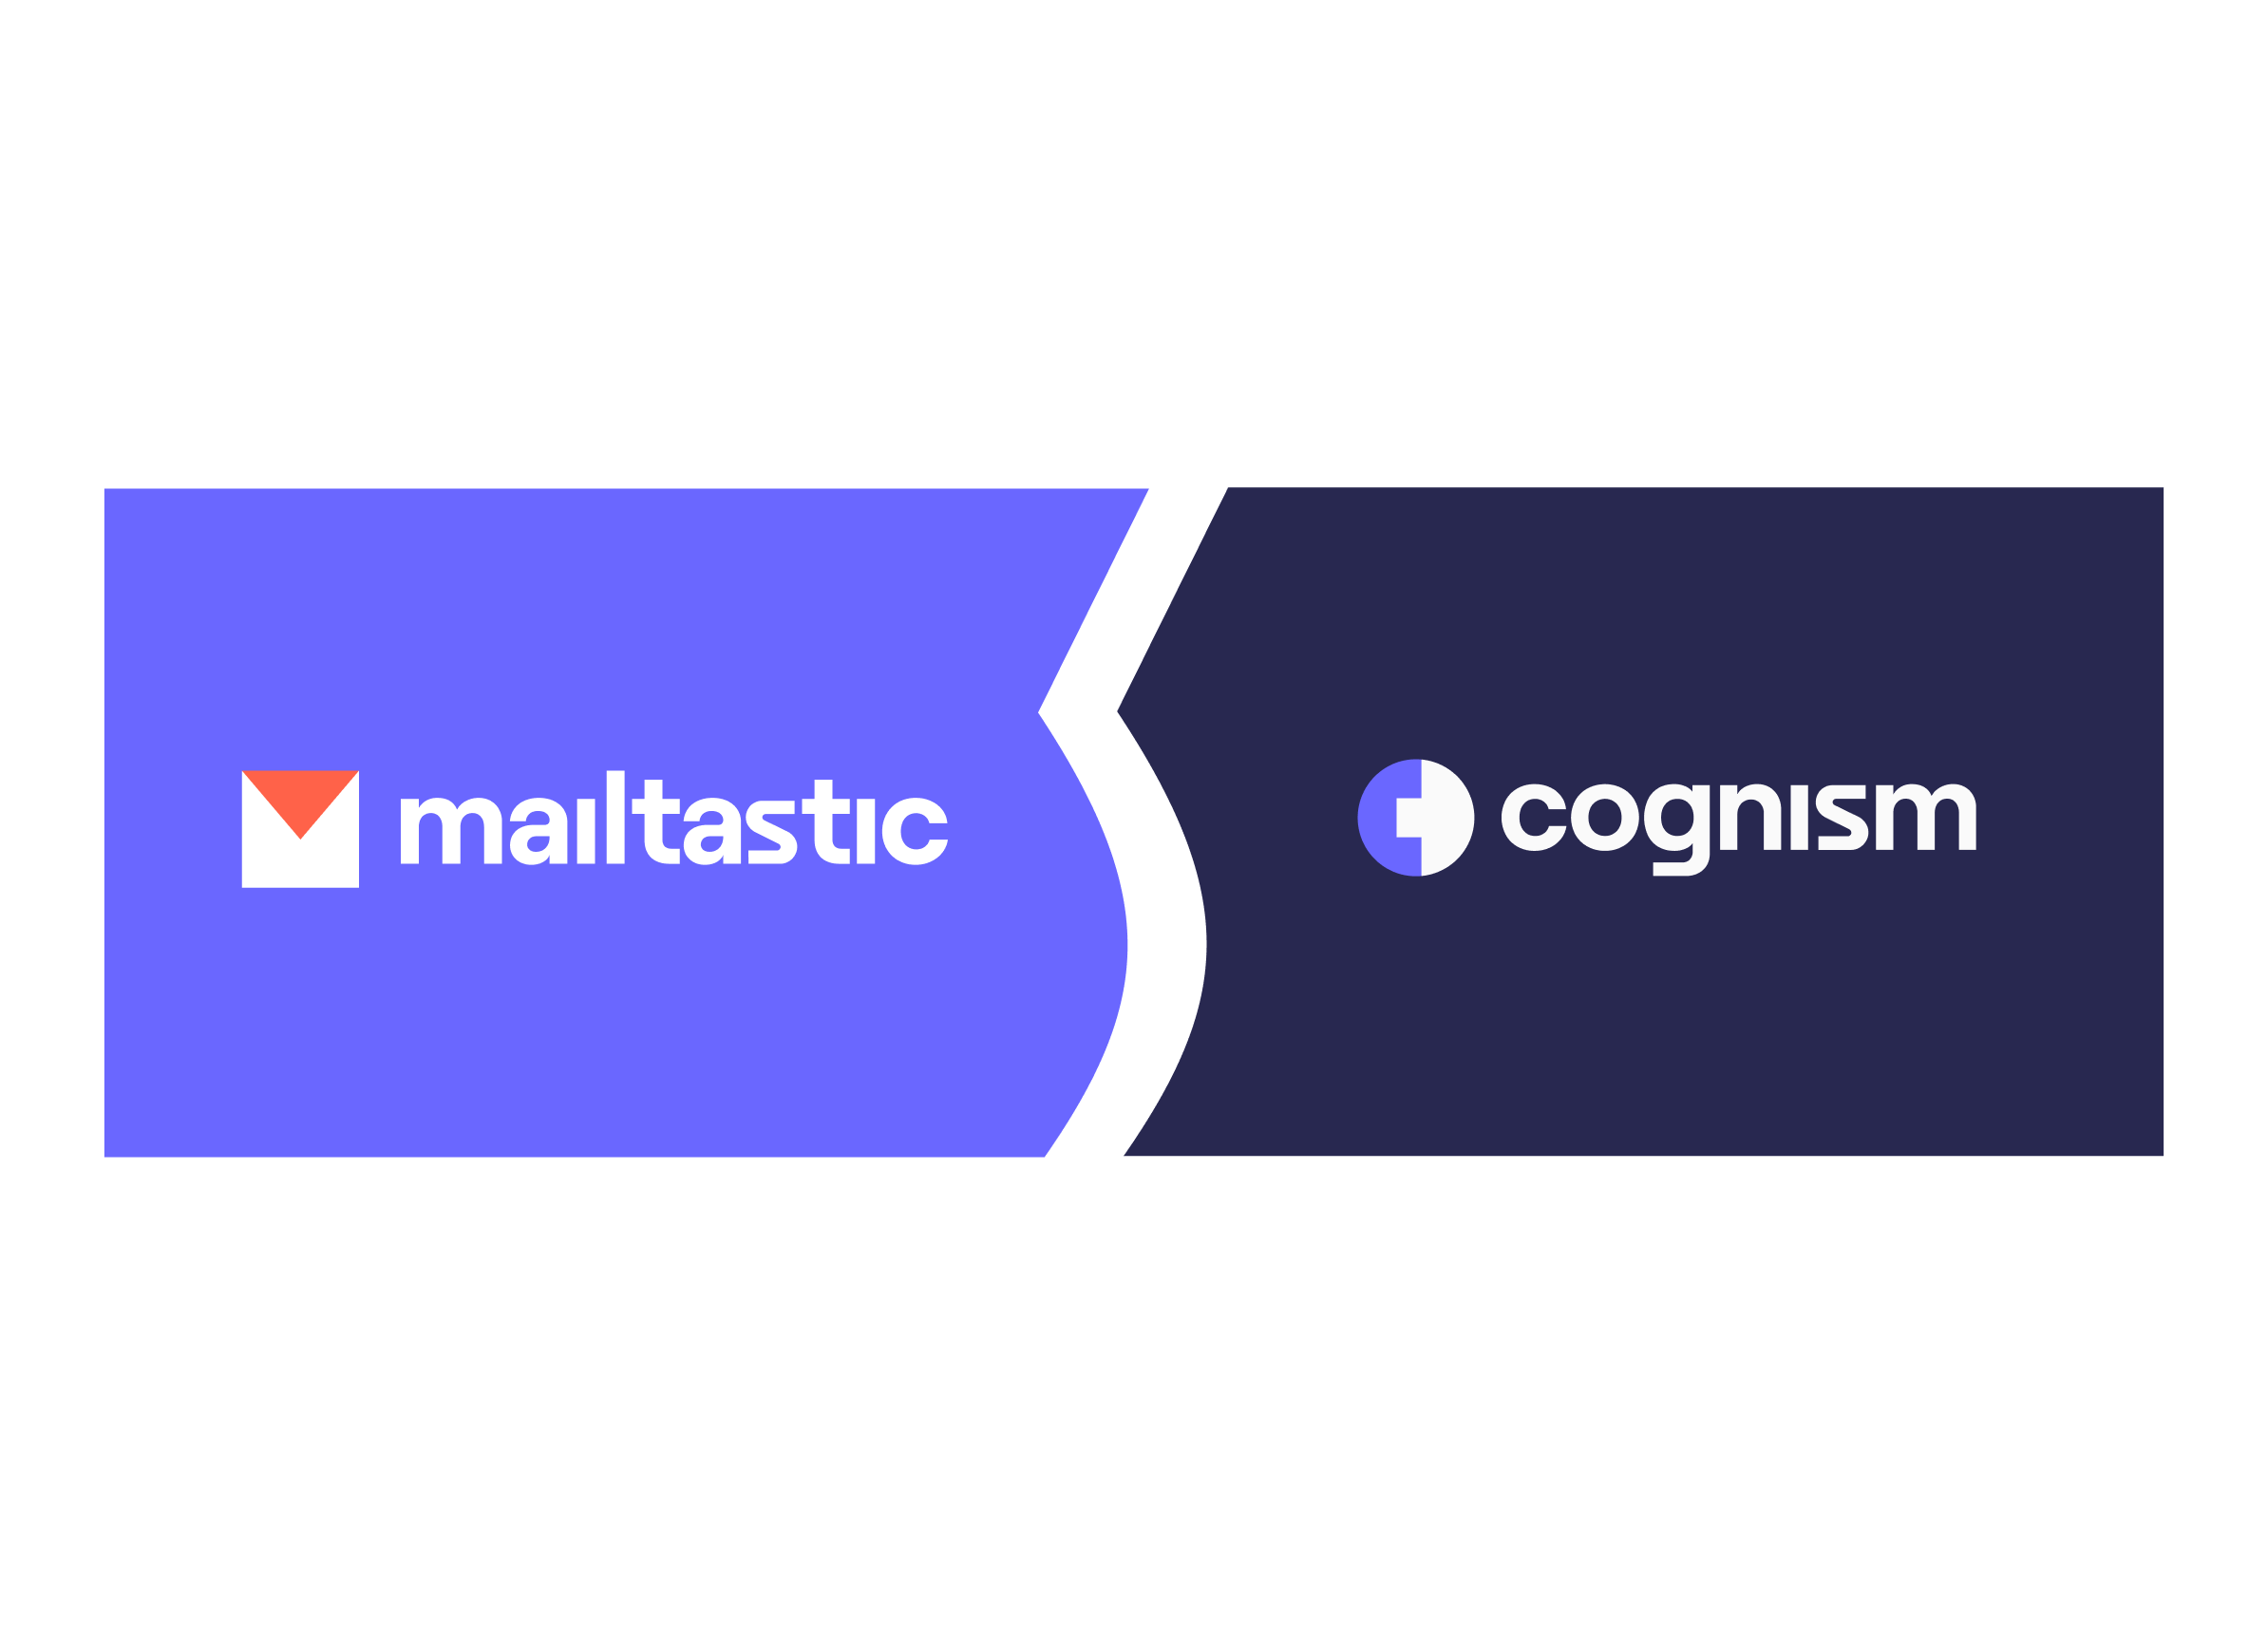 Mailtastic is part of the Cognism group